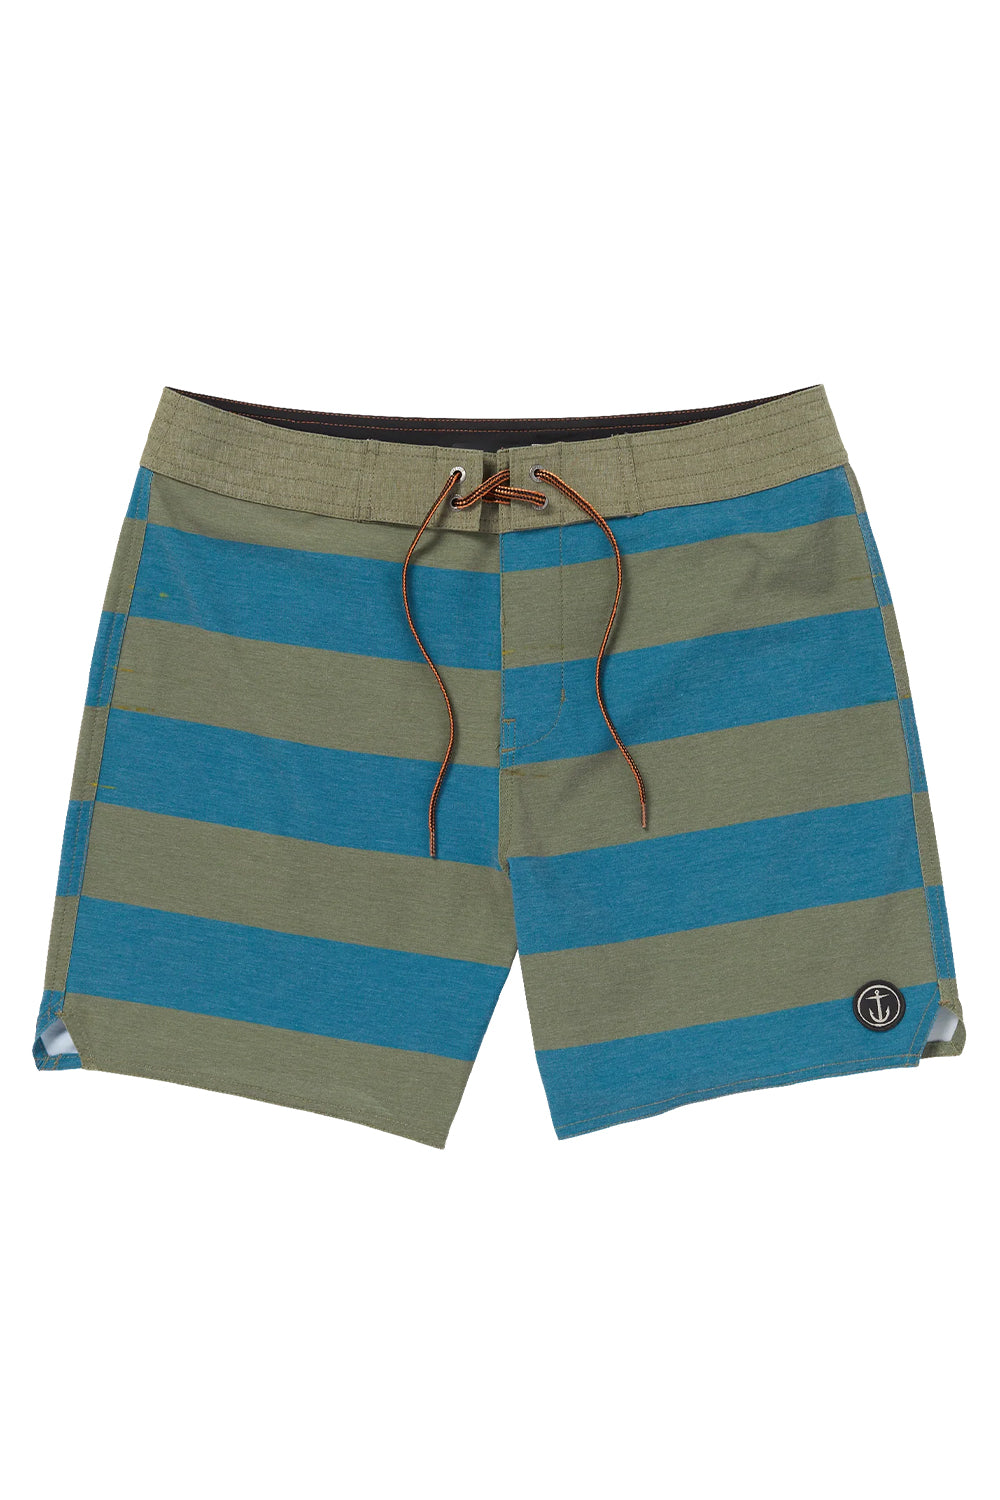 Captain Fin Co Mens Voyager Rings 17" Boardshorts